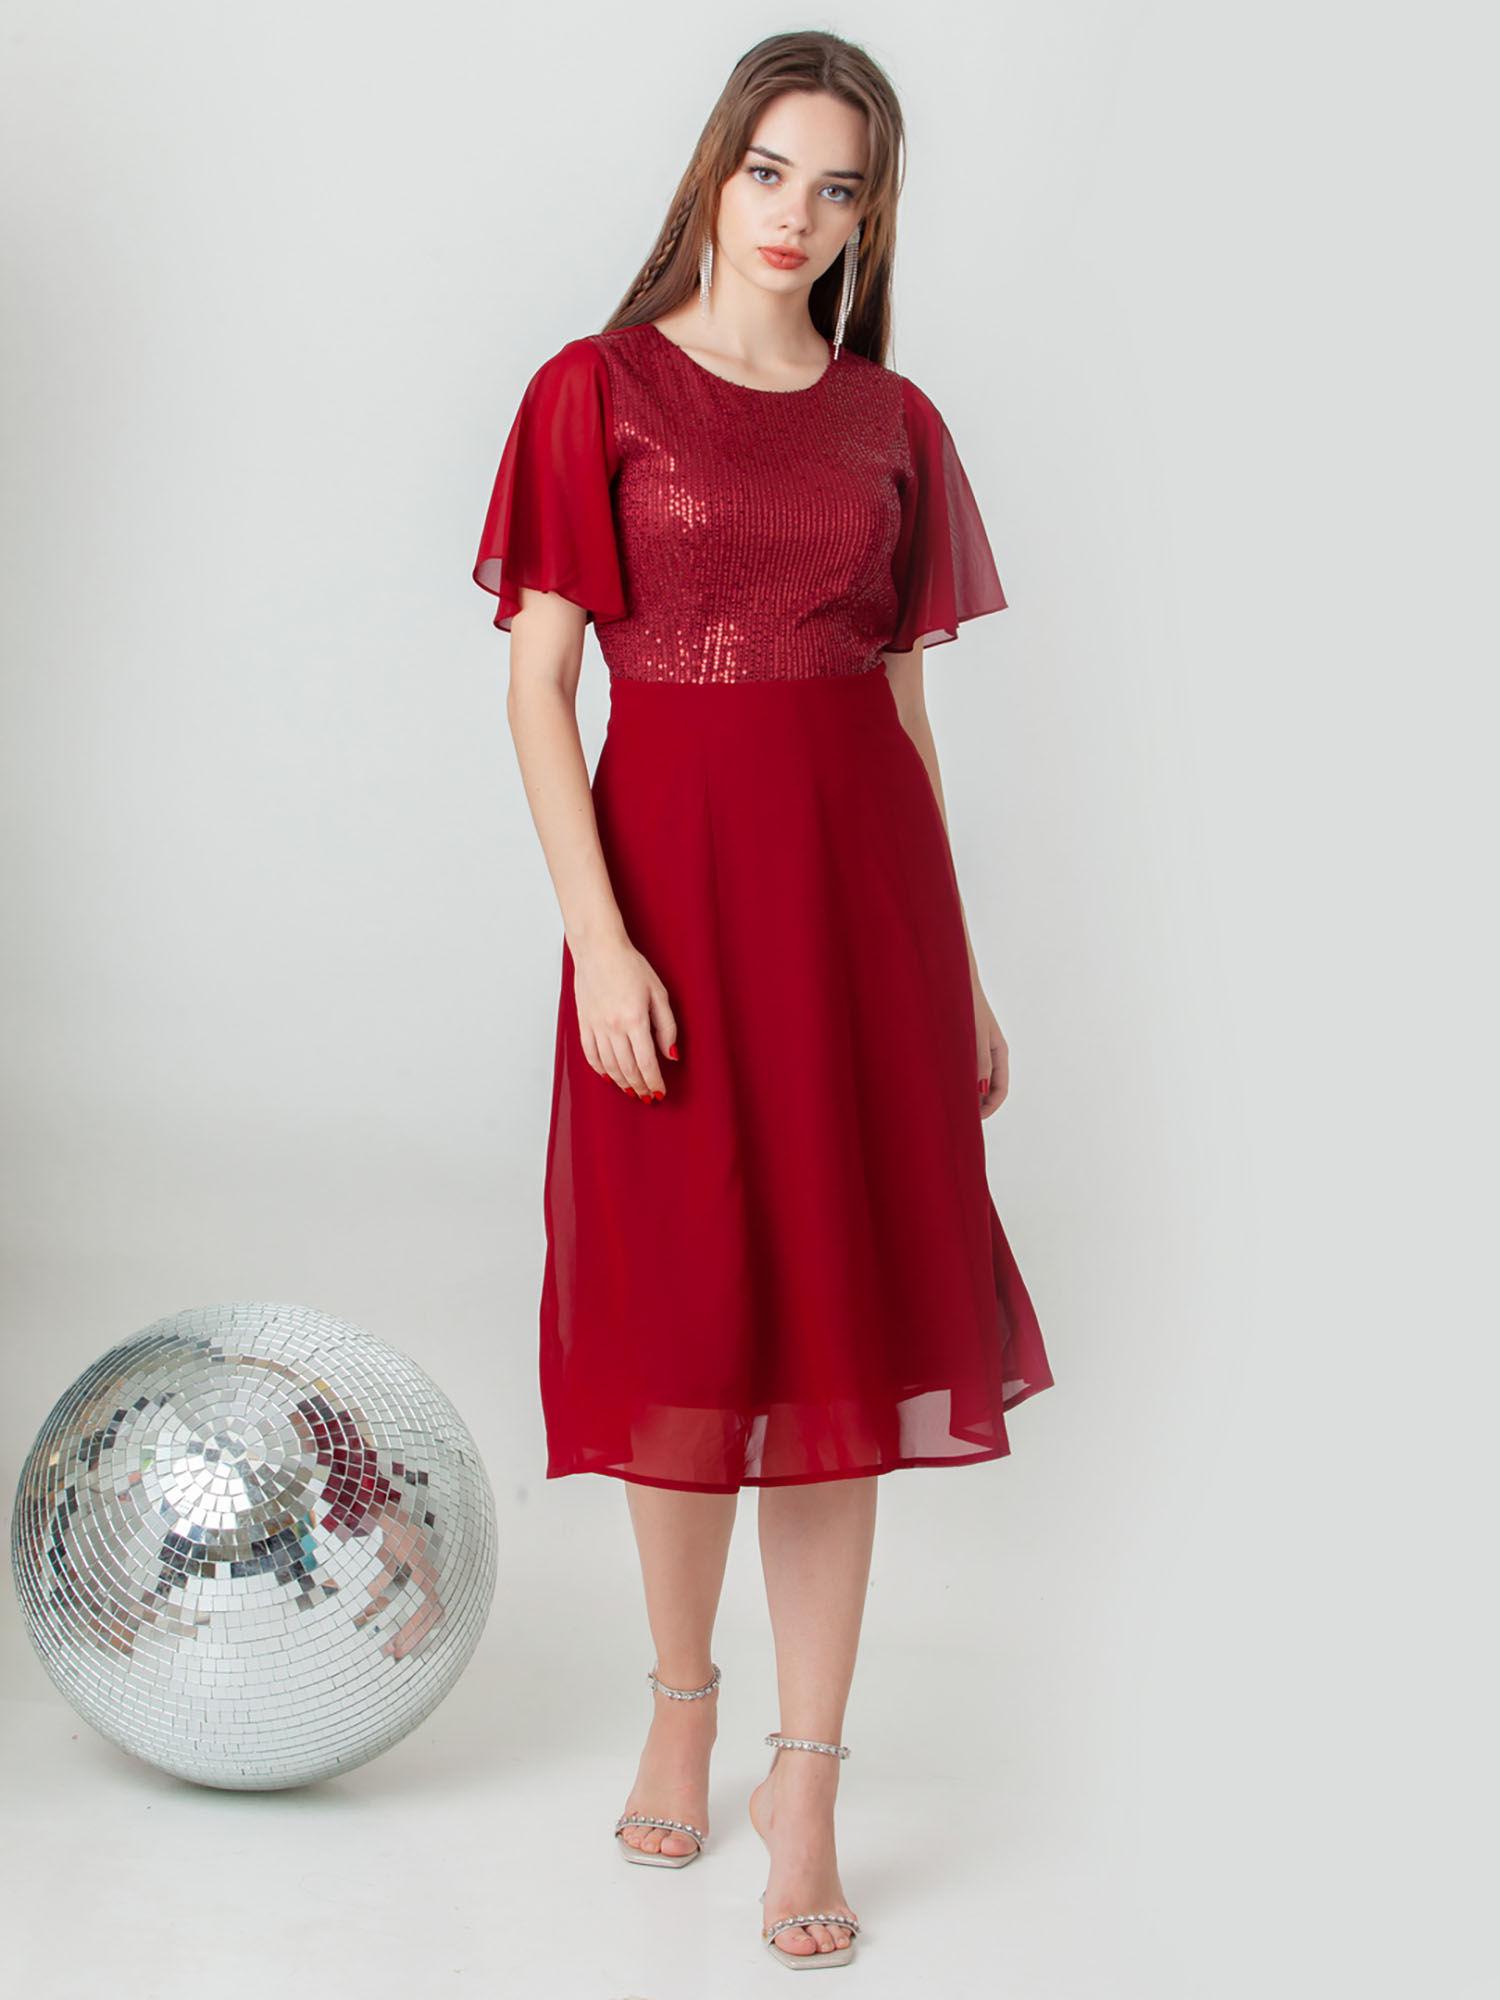 womens red embellished/sequined midi dress